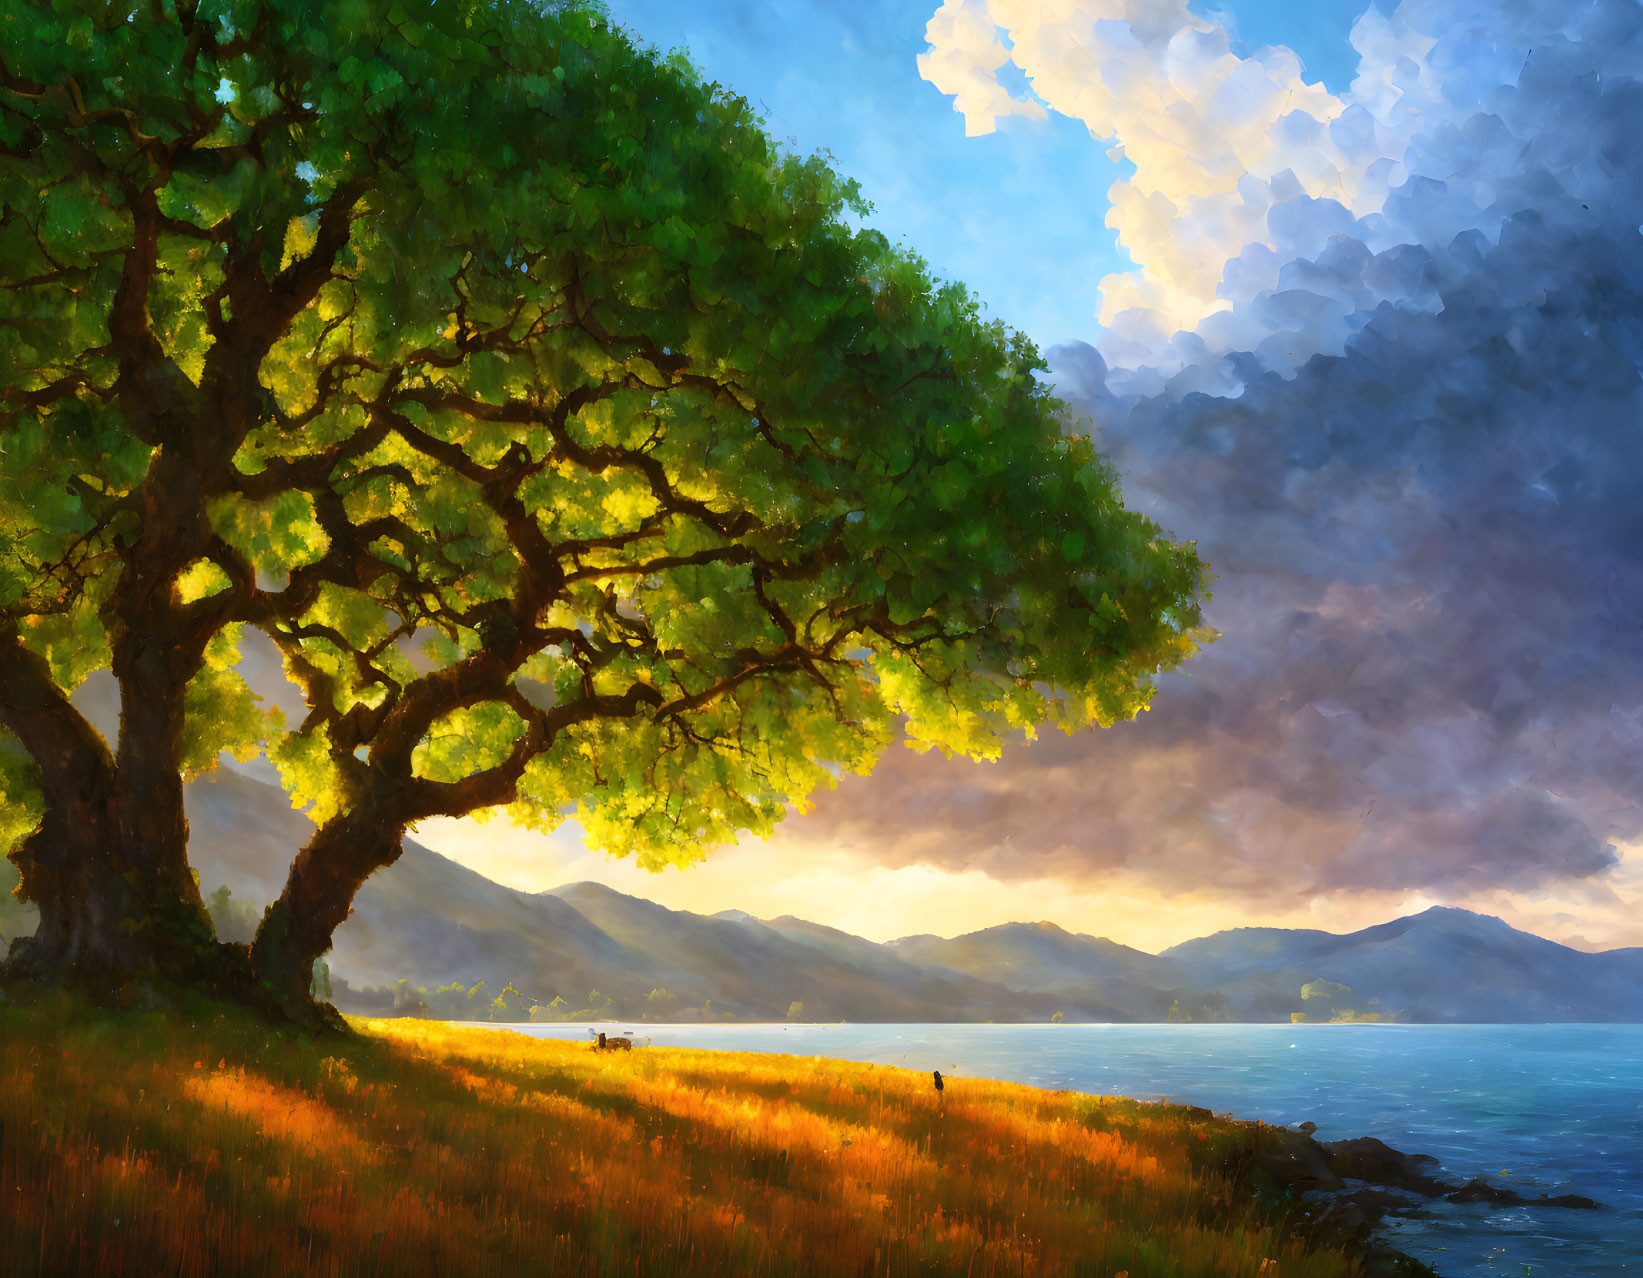 Majestic tree painting with sunlight, lakeside, rolling hills